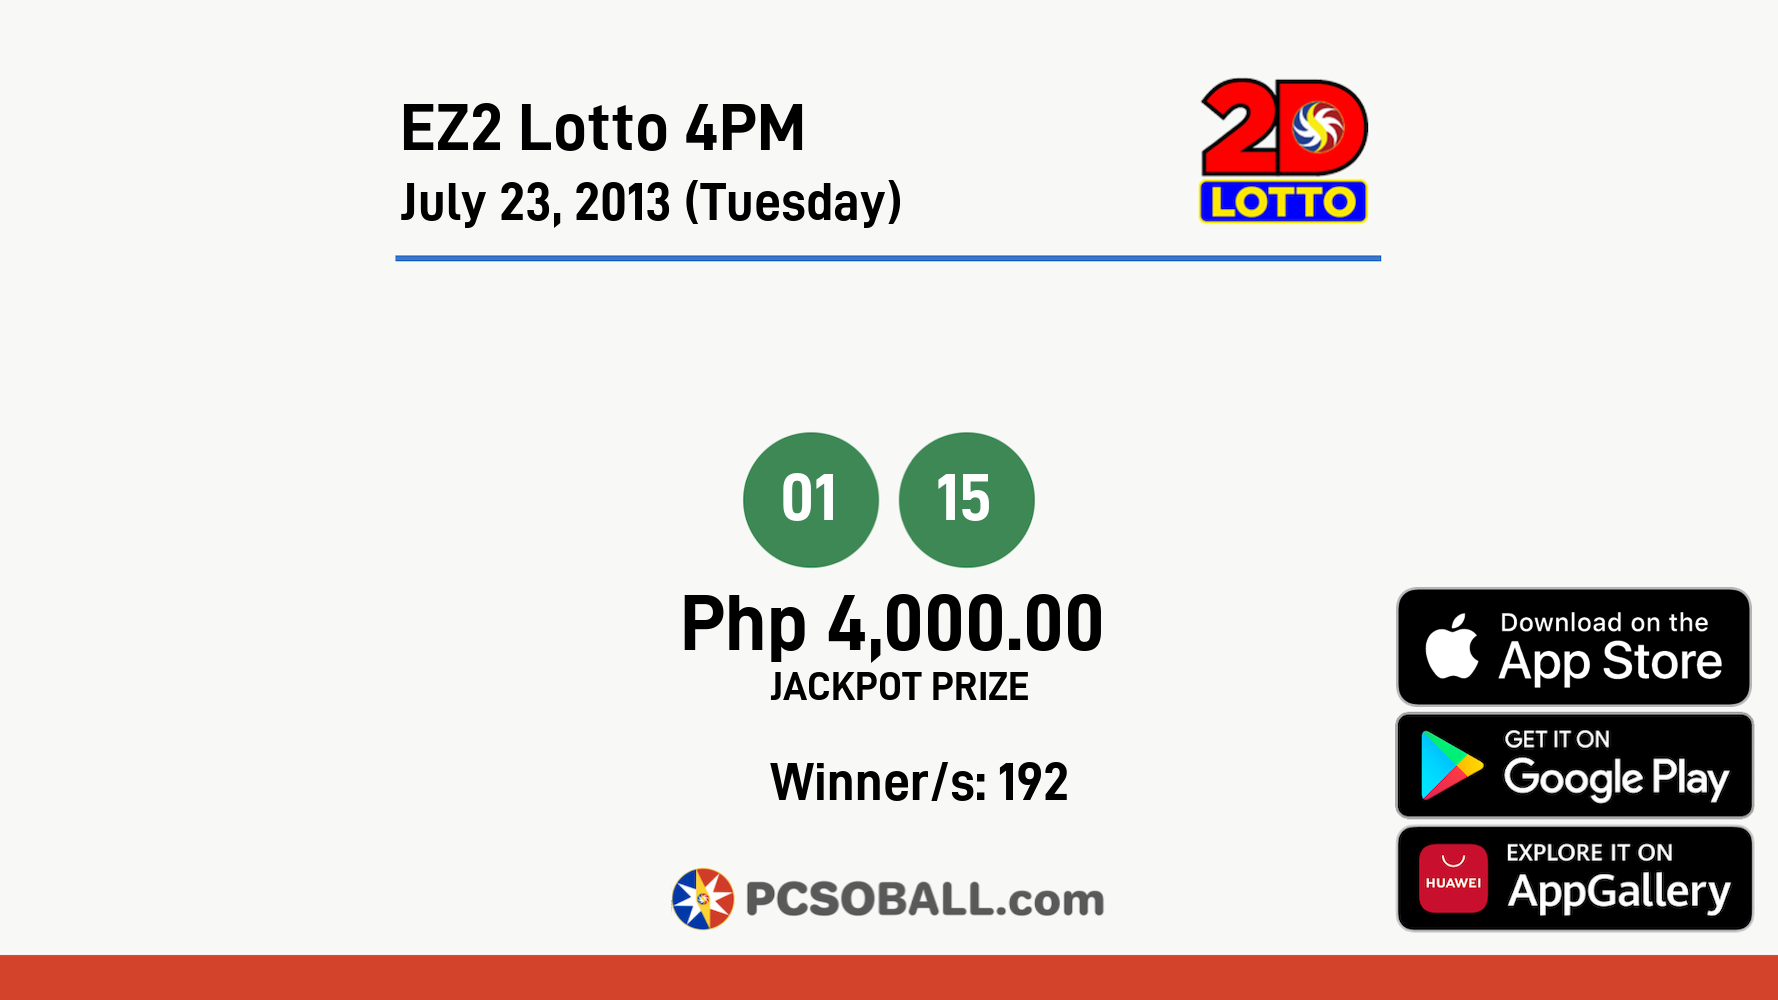 EZ2 Lotto 4PM July 23, 2013 (Tuesday) Result